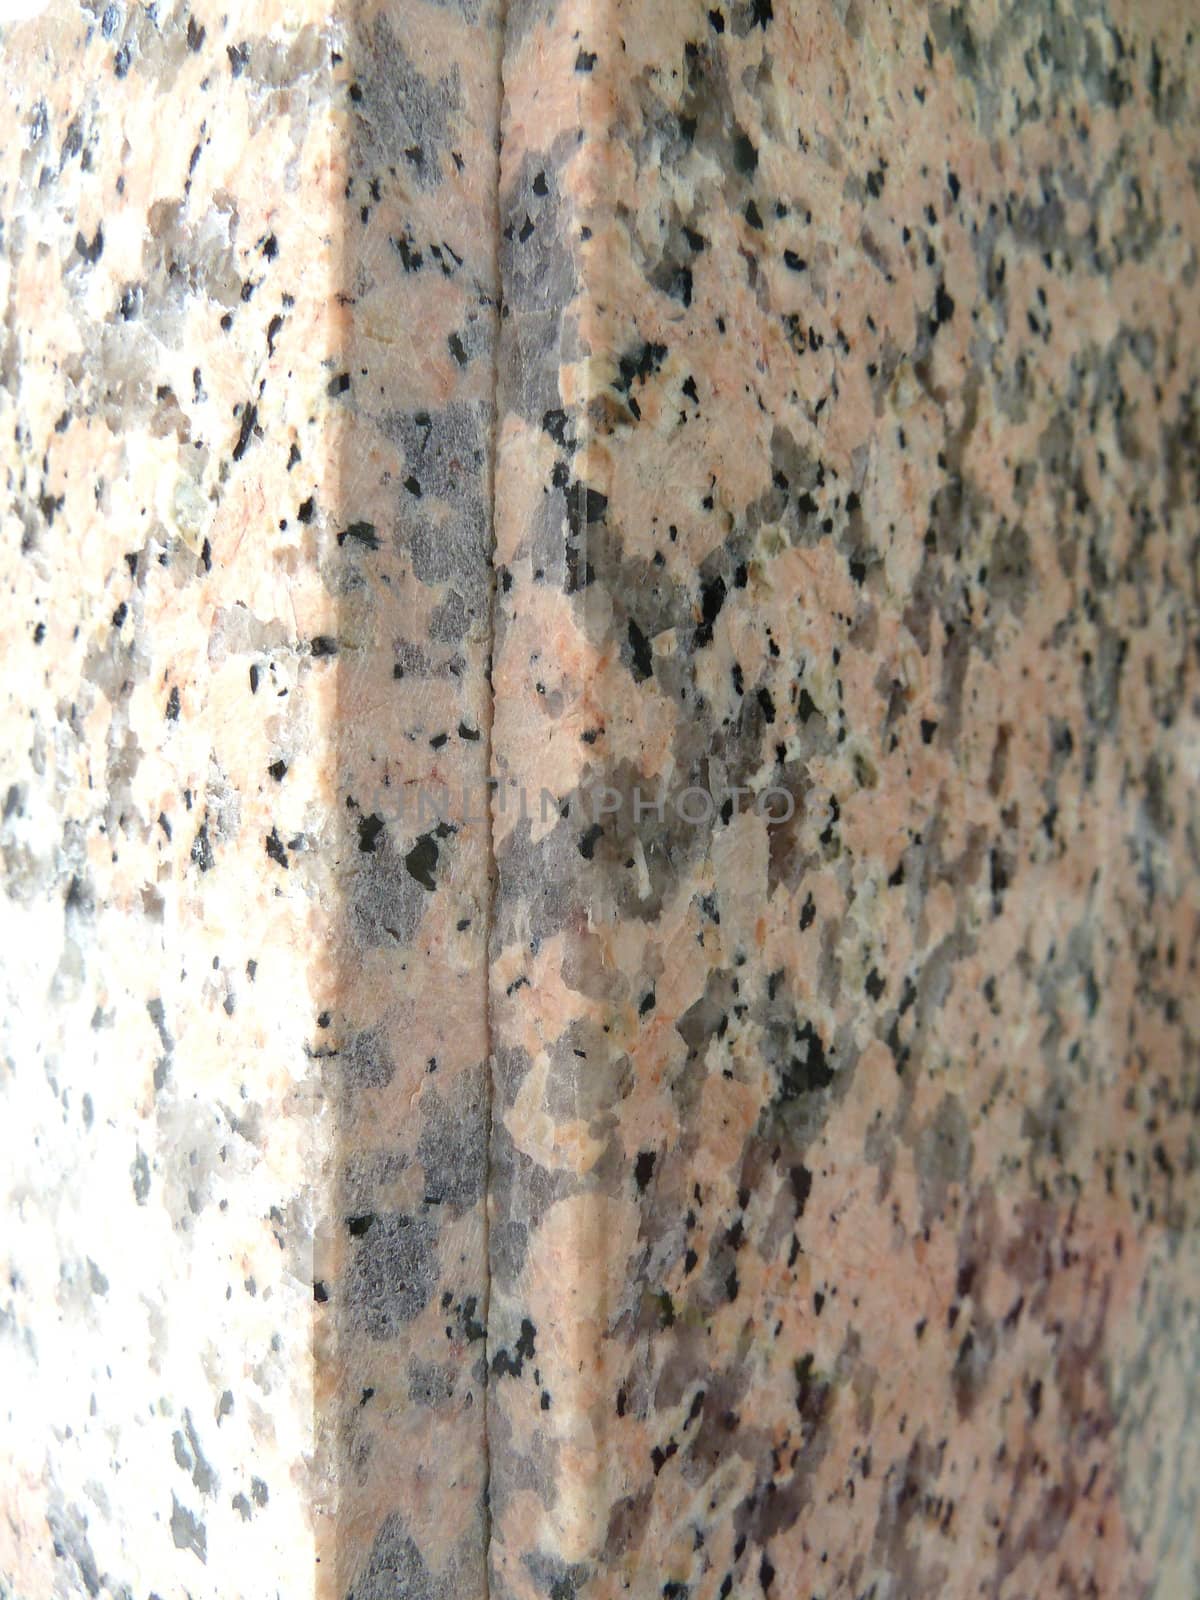 patterned surface at a corner as a background